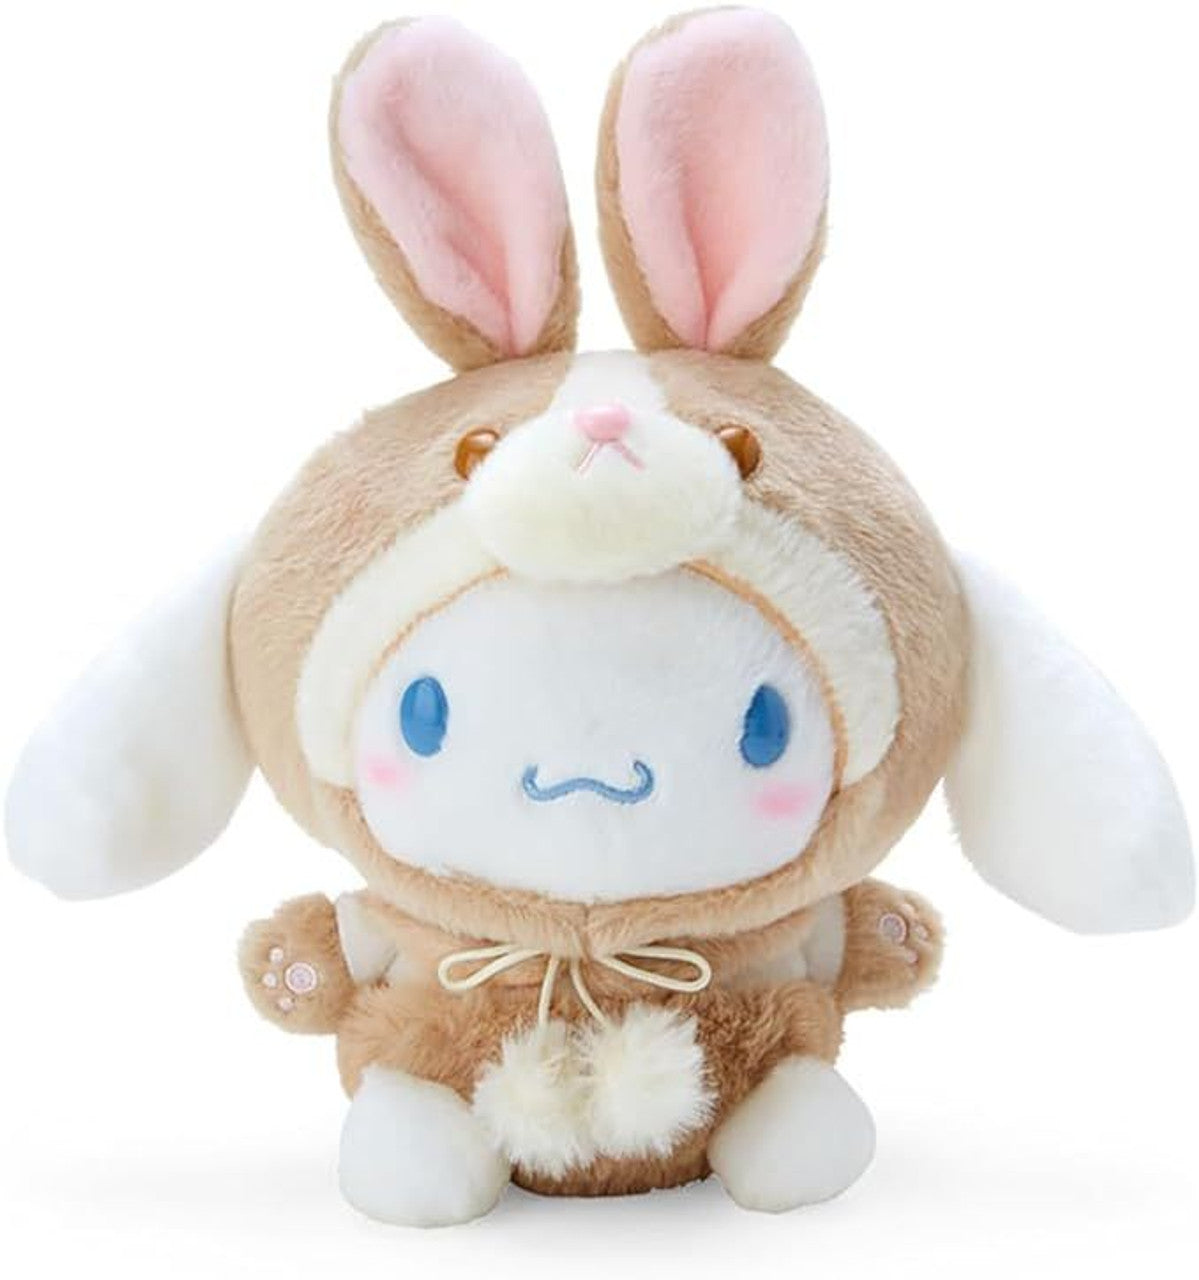 Plush - Sanrio Character Forest Animal (Japan Limited Edition)